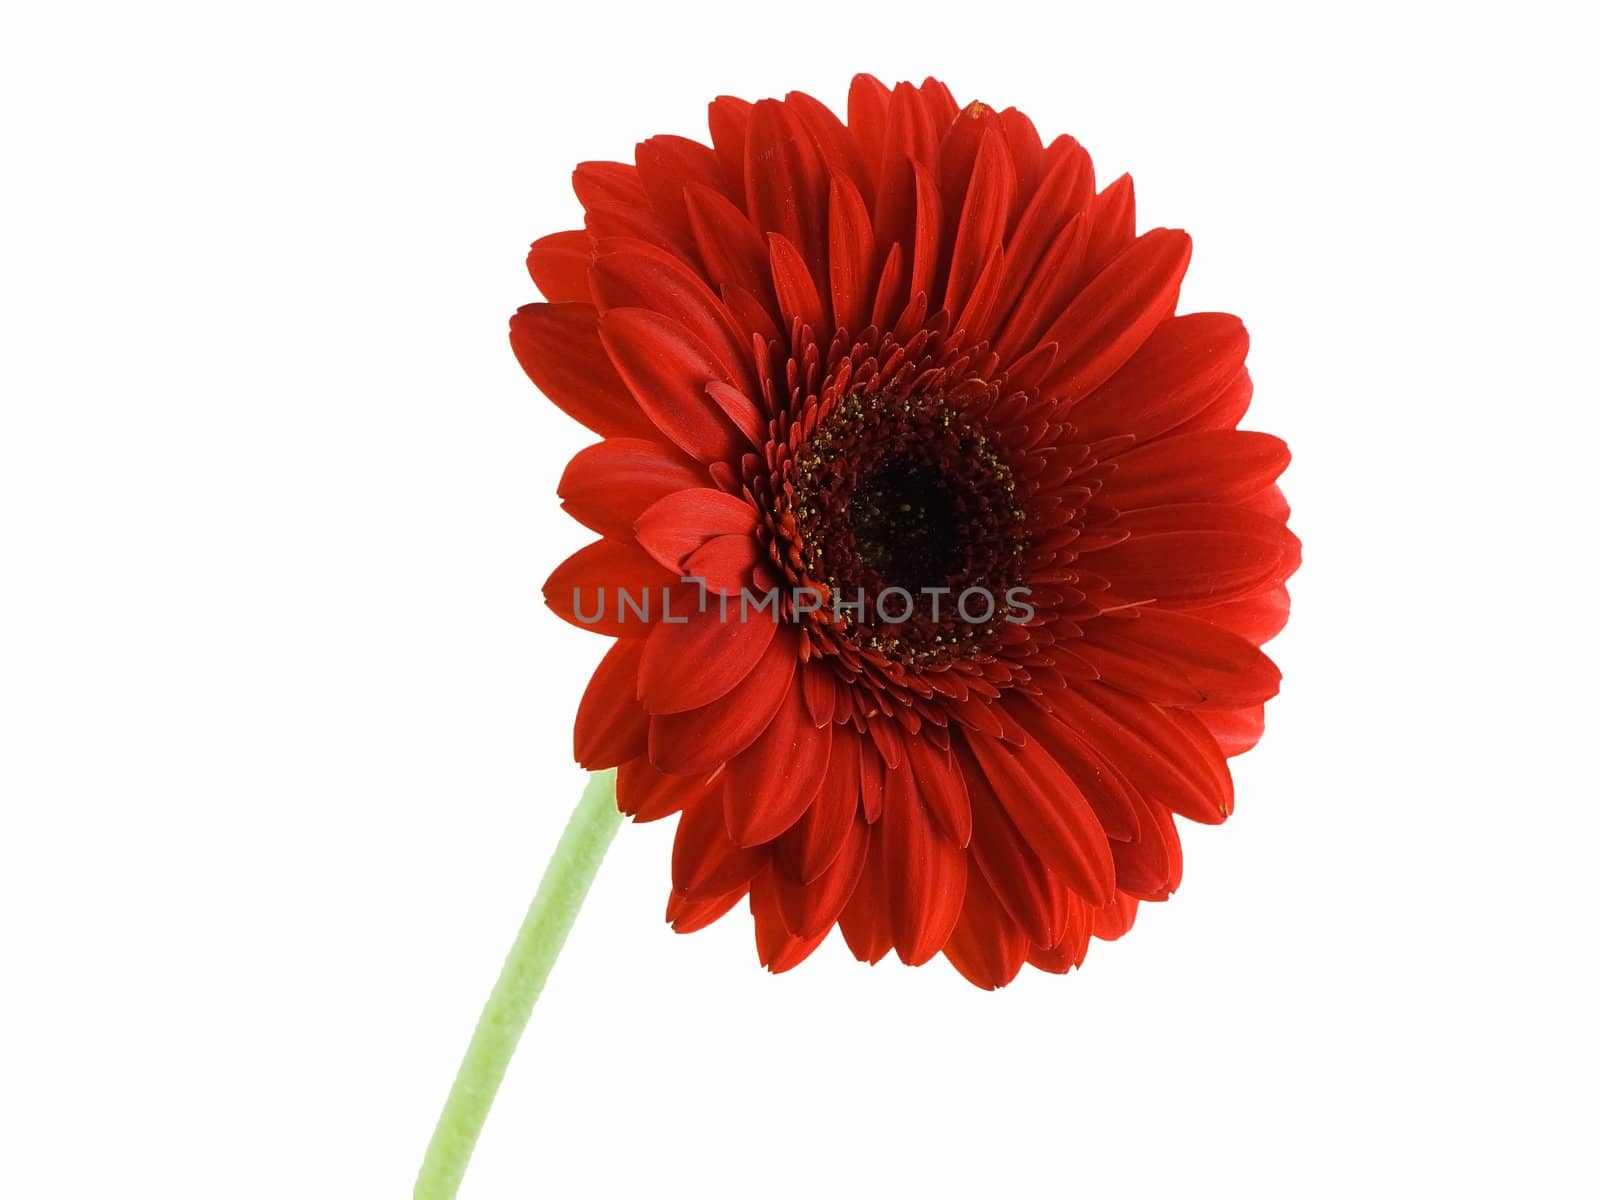 Red gerbera daisy isolated on a white background